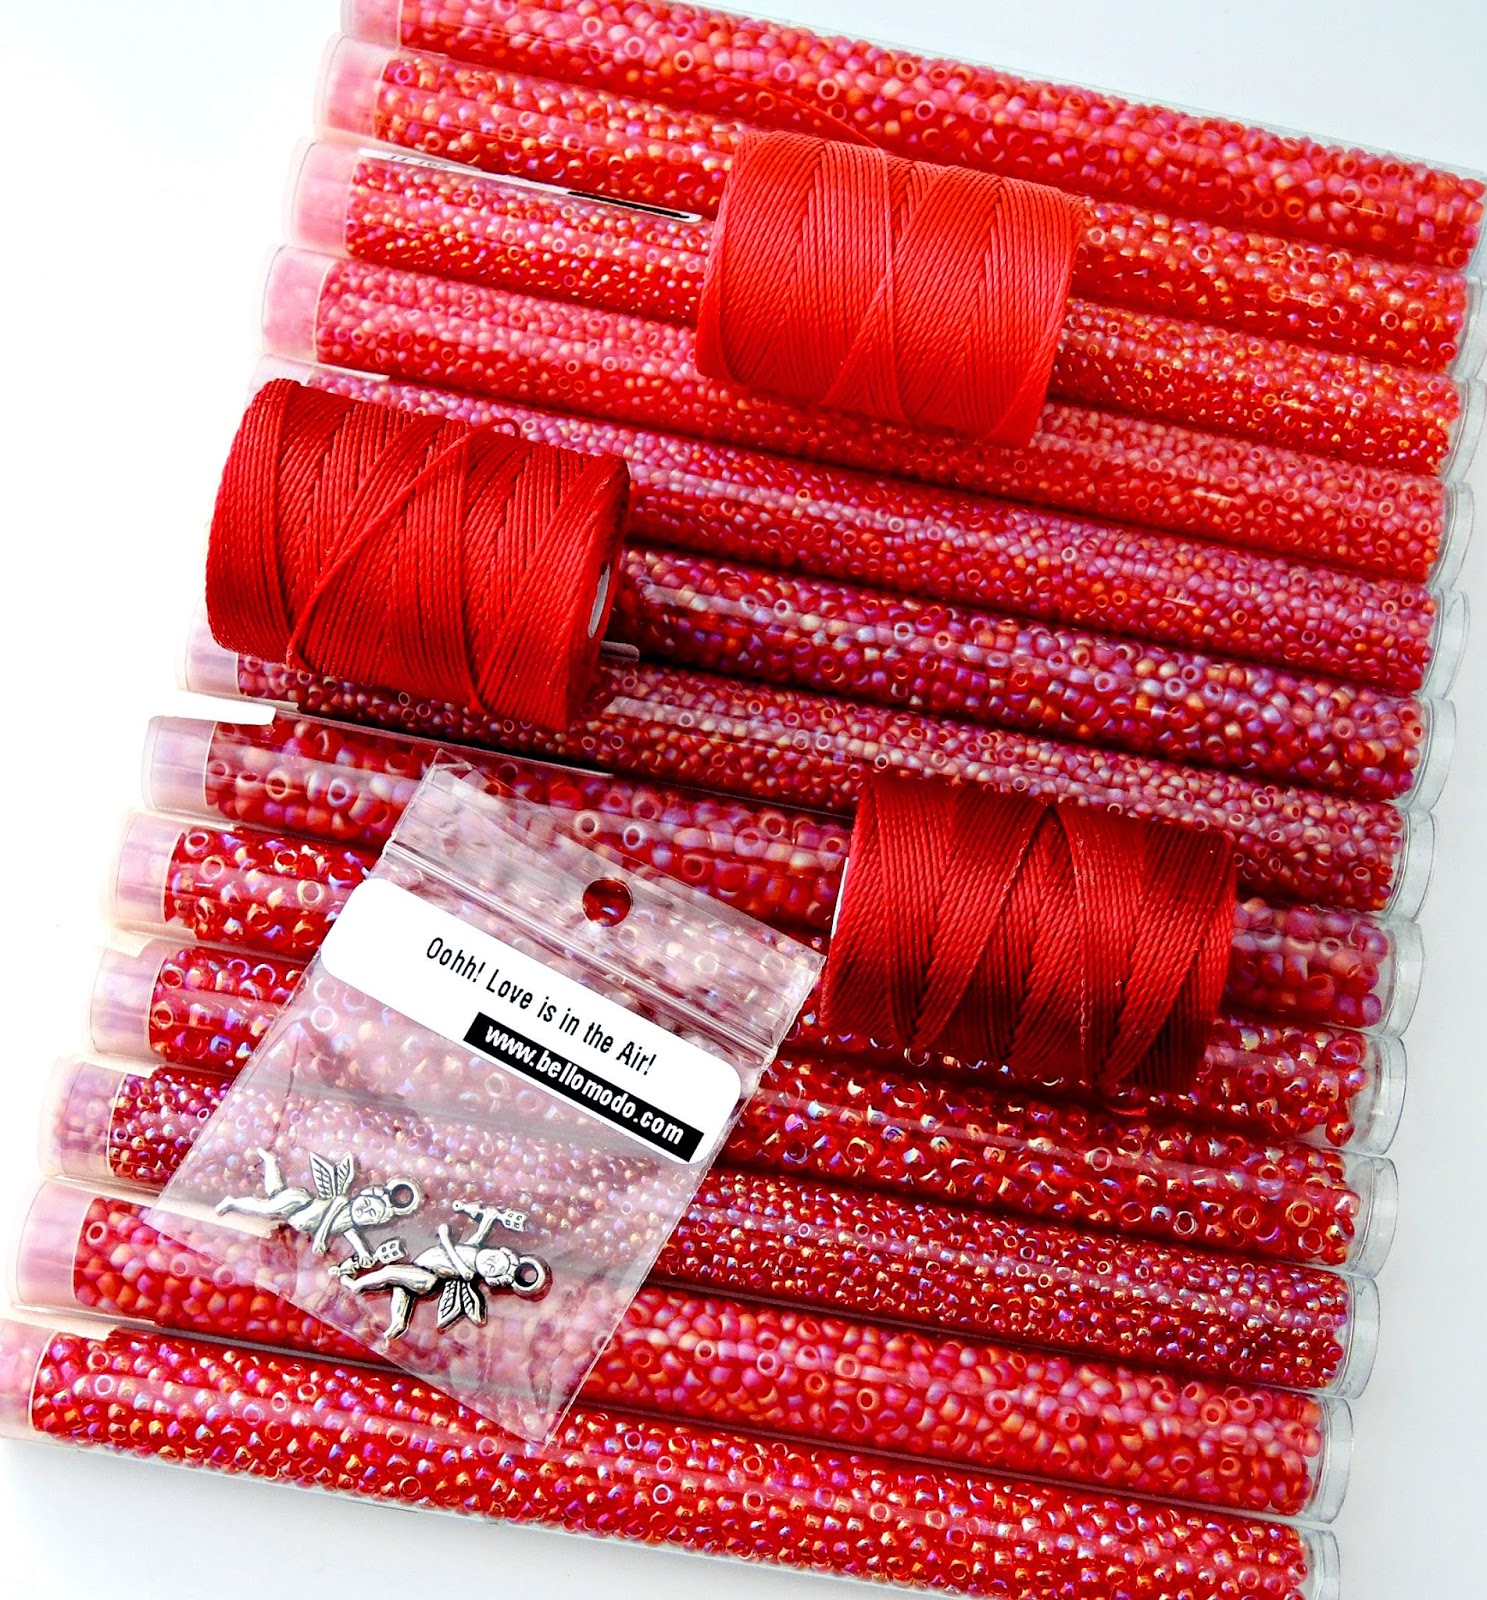 Selection of seed beads and bead cord in red.